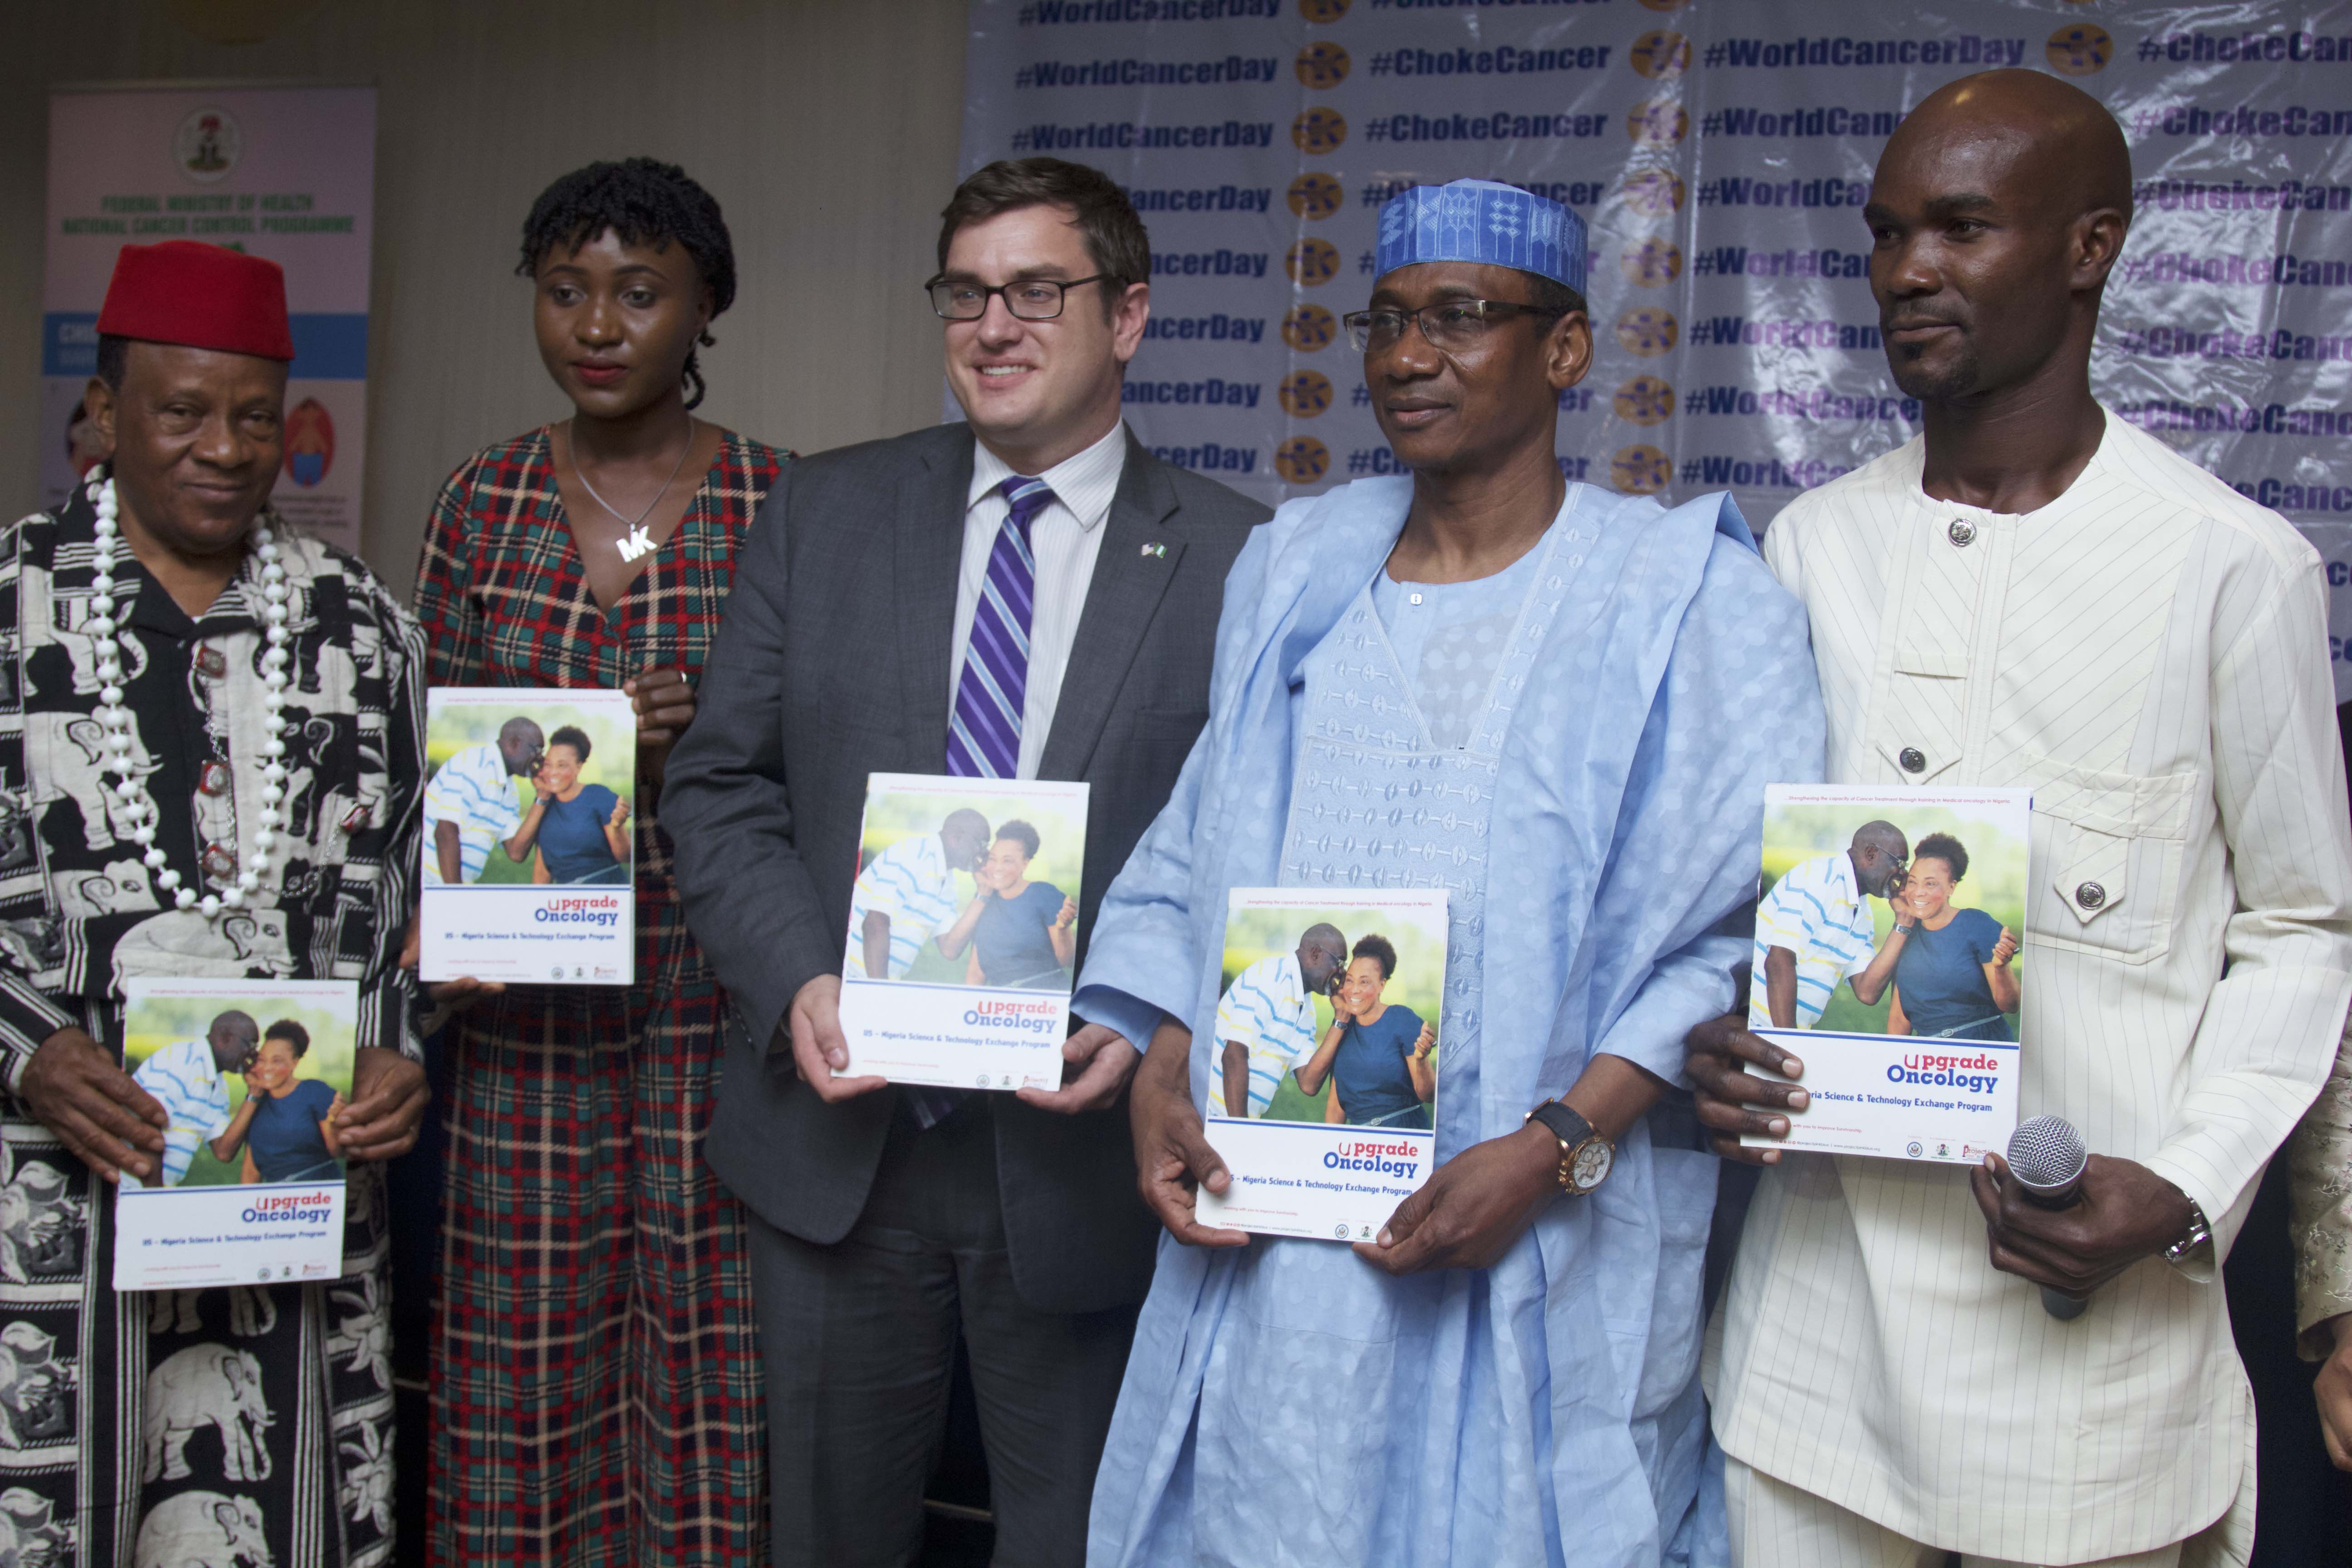 U.S. Mission Nigeria-supported “Project PINK BLUE” launched the Upgrade Oncology